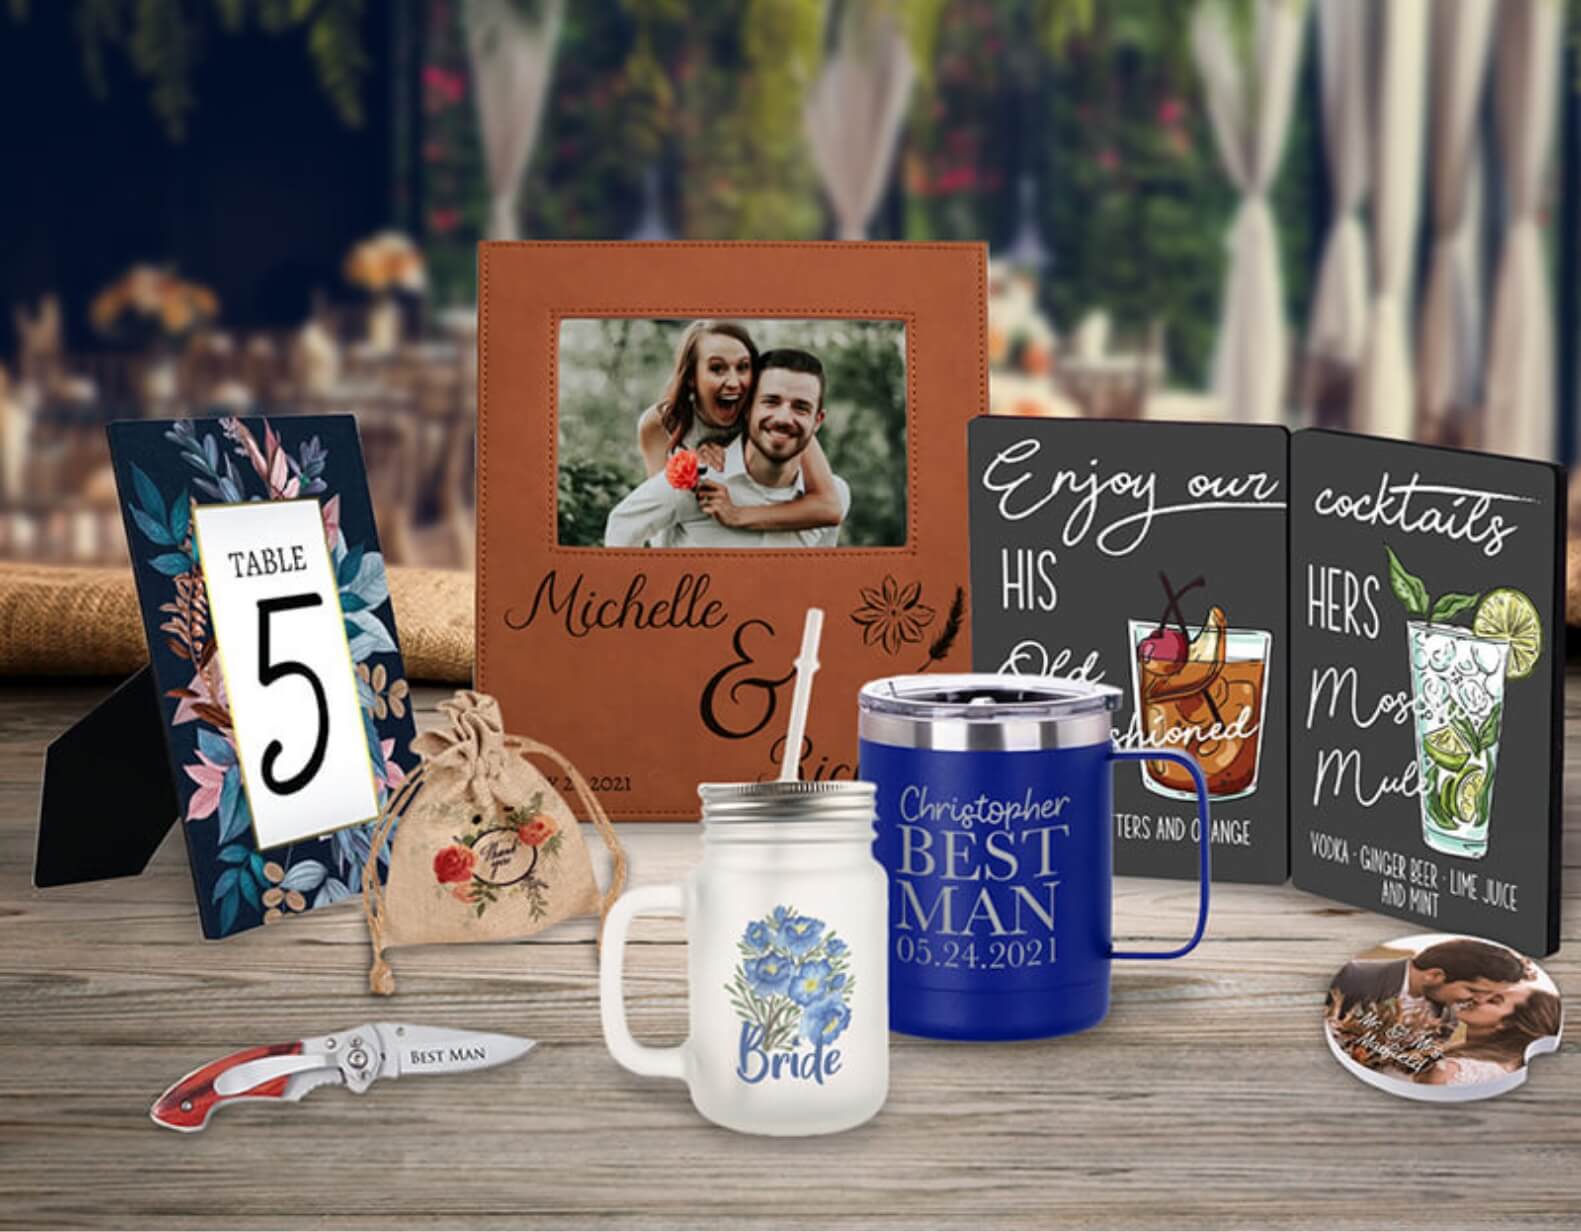 Variety of personalized items for brides, grooms, bridal parties, and table decorations at a wedding